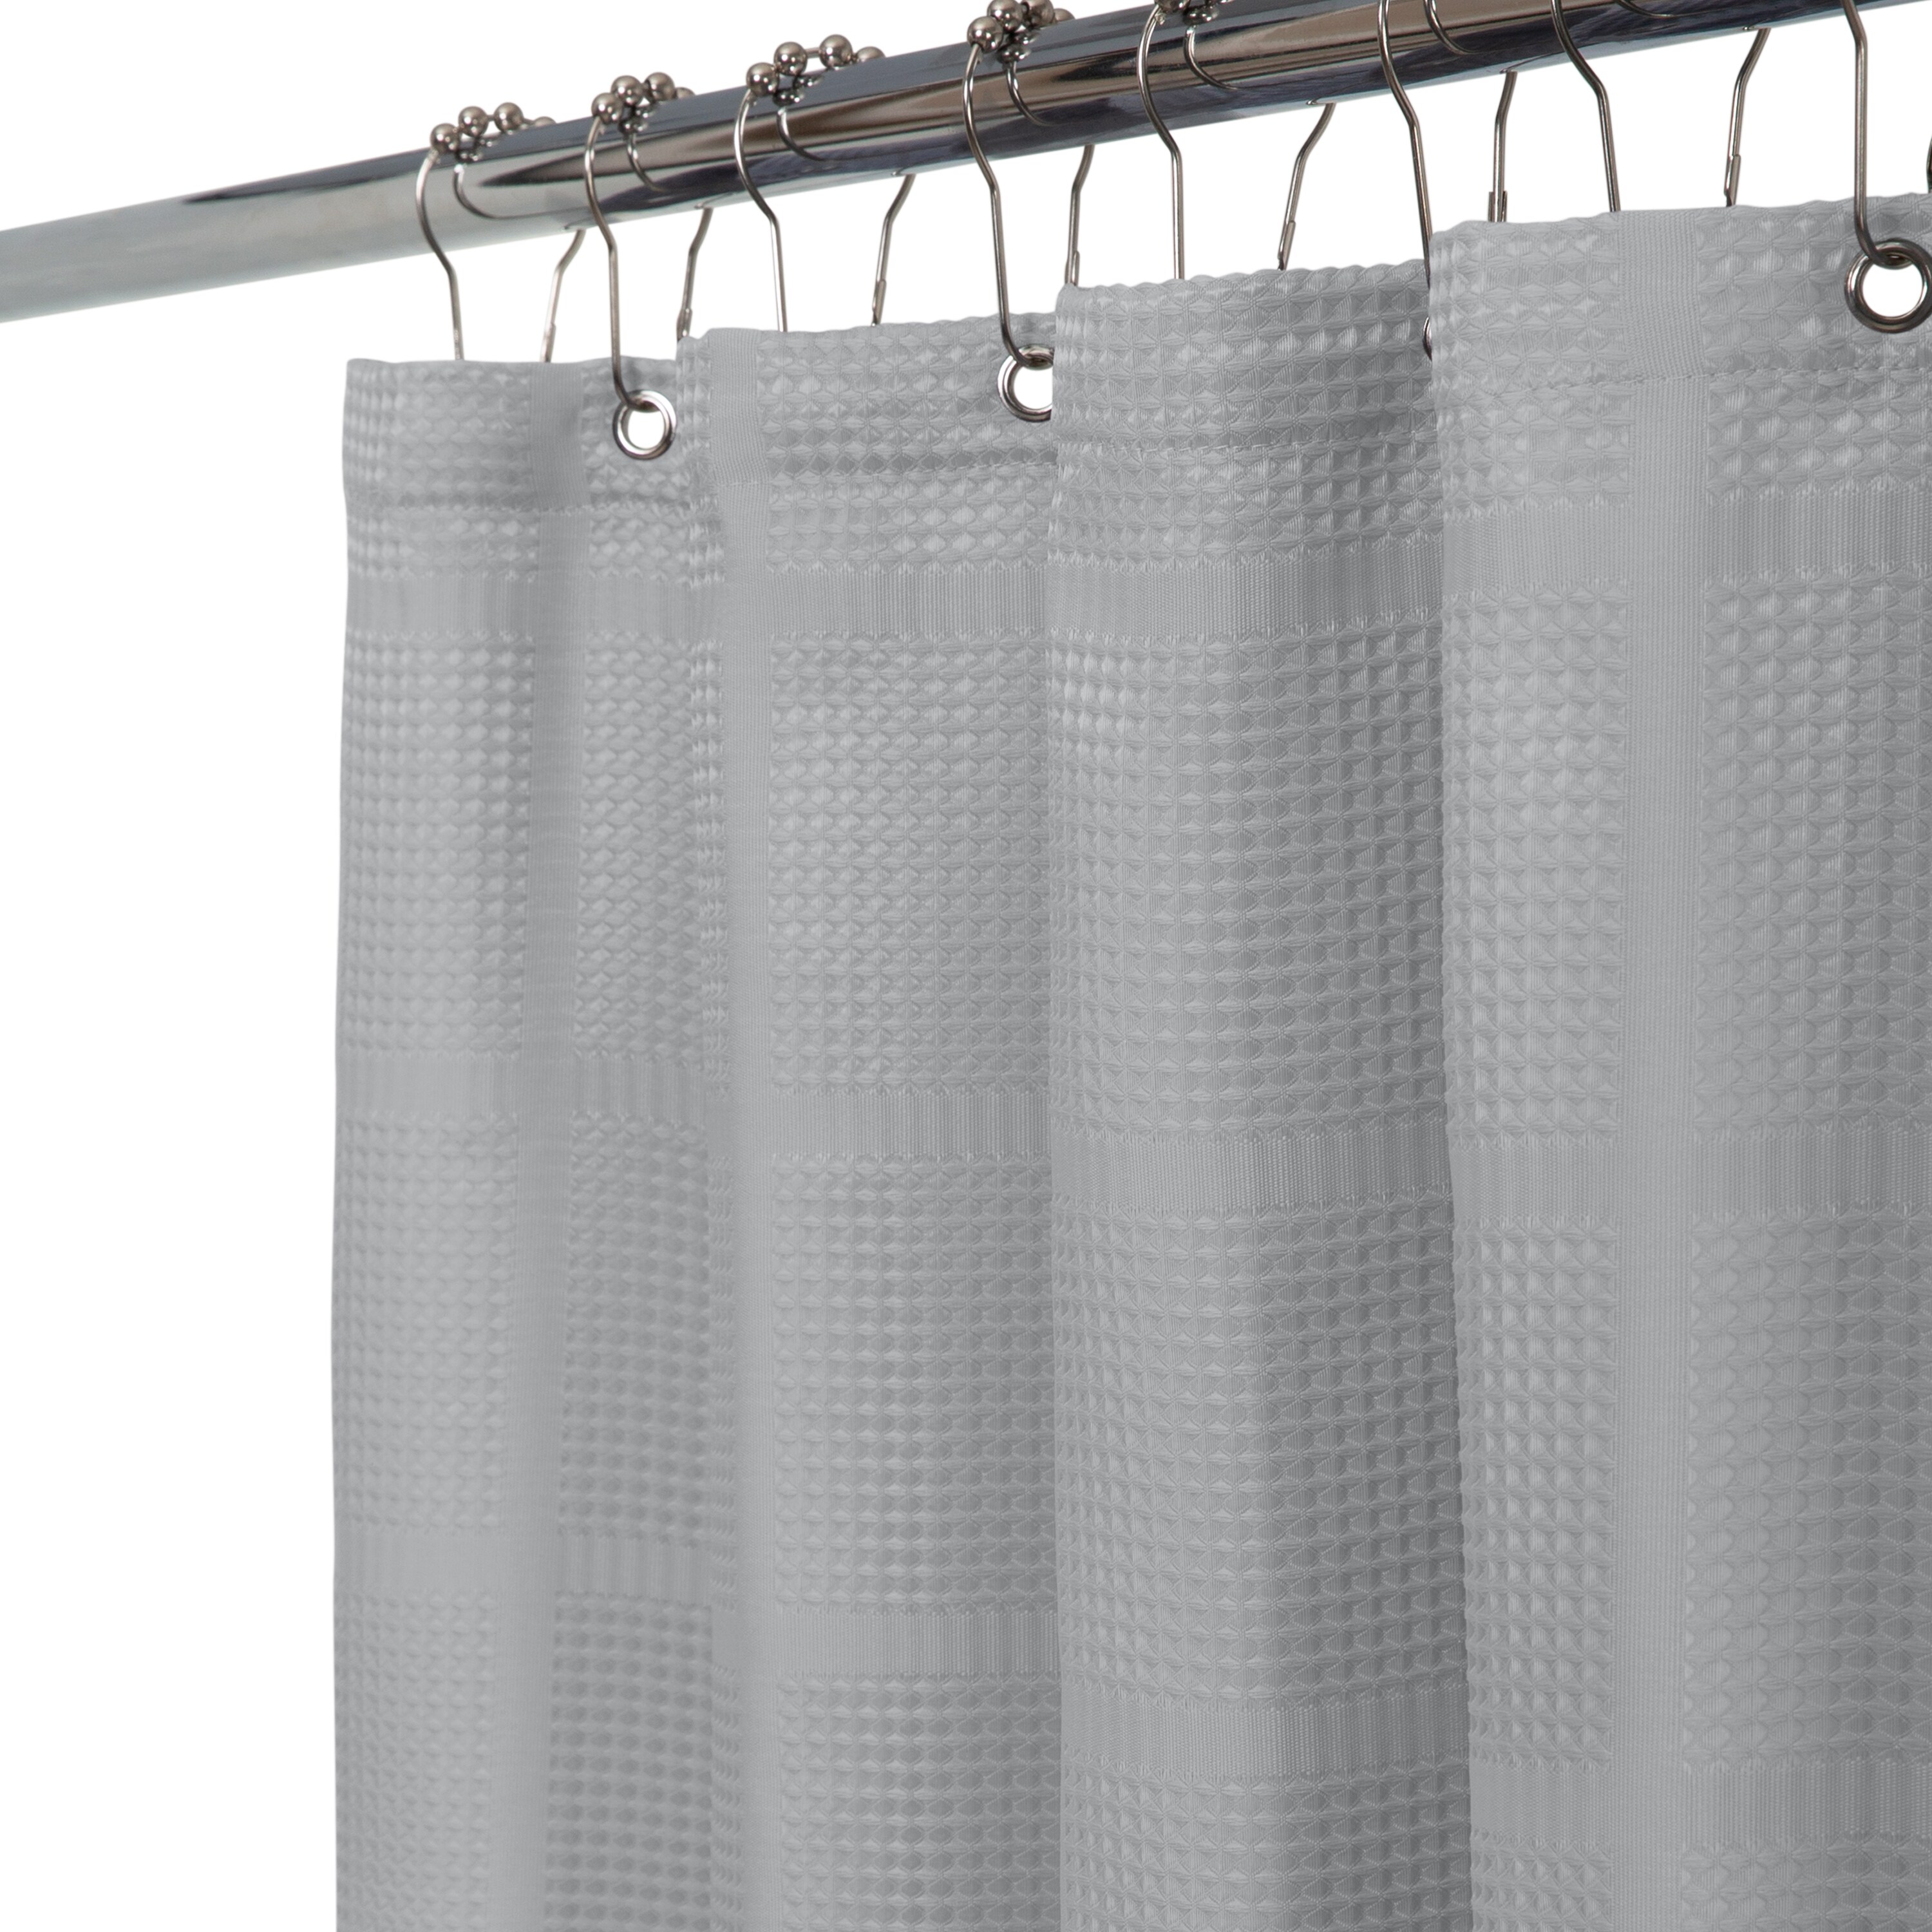 Polyester Grey Patterned Shower Curtain, X 70 Shower Curtain